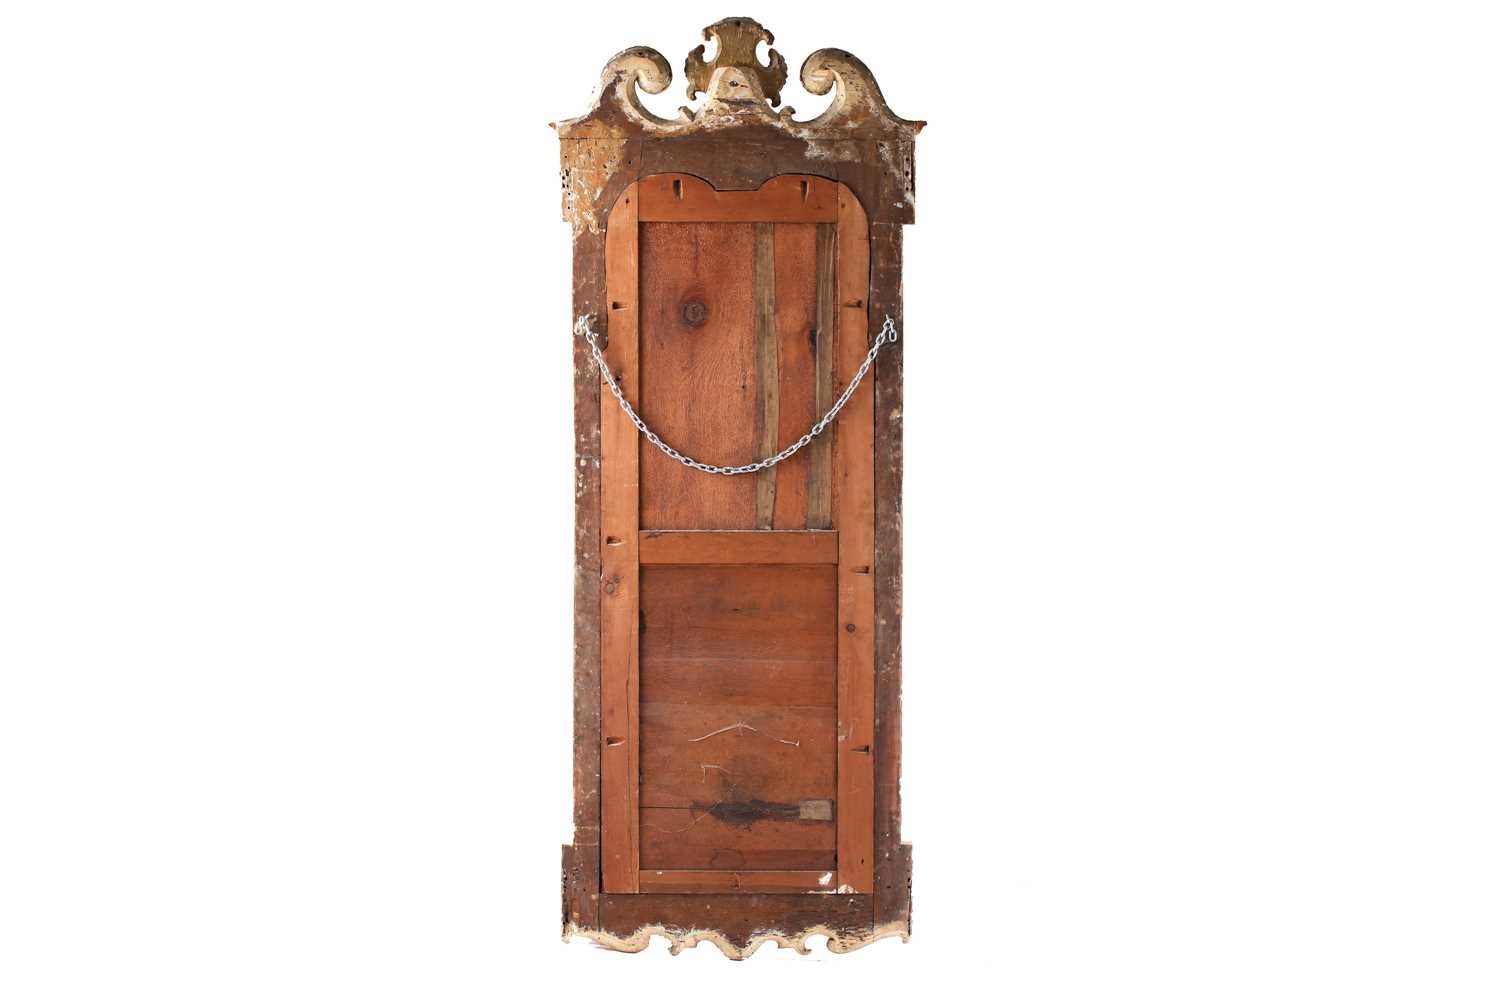 A Queen Anne carved wood and gilt gesso pier mirror with swan neck pediment and leafy mantle above a - Image 2 of 2